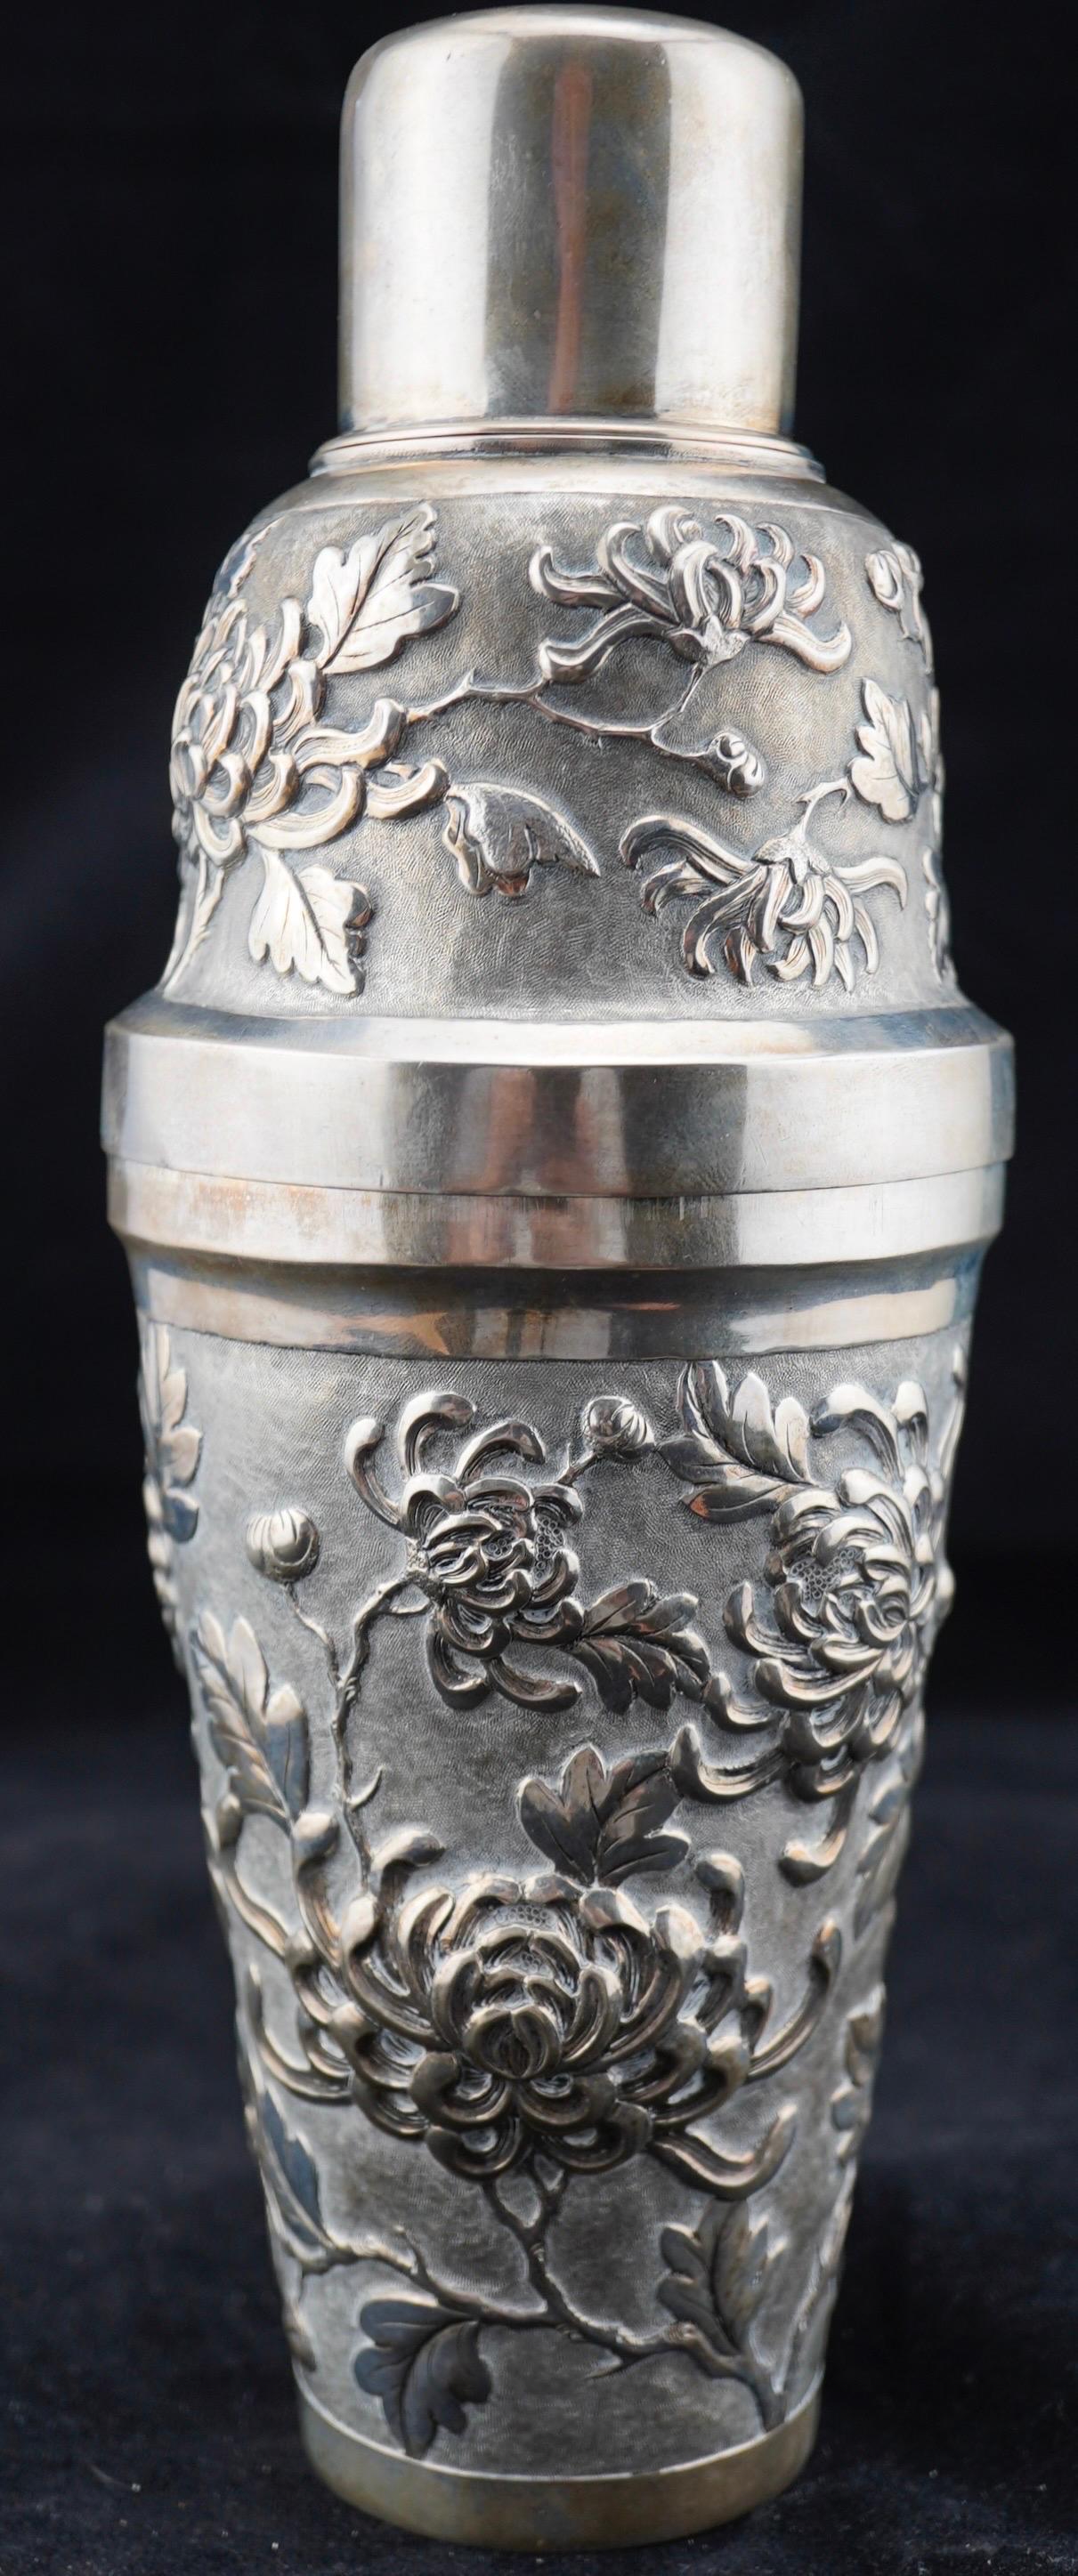 Chinese export silver repousse cocktail shaker with chr.ythanthemum decoration. Marked for 